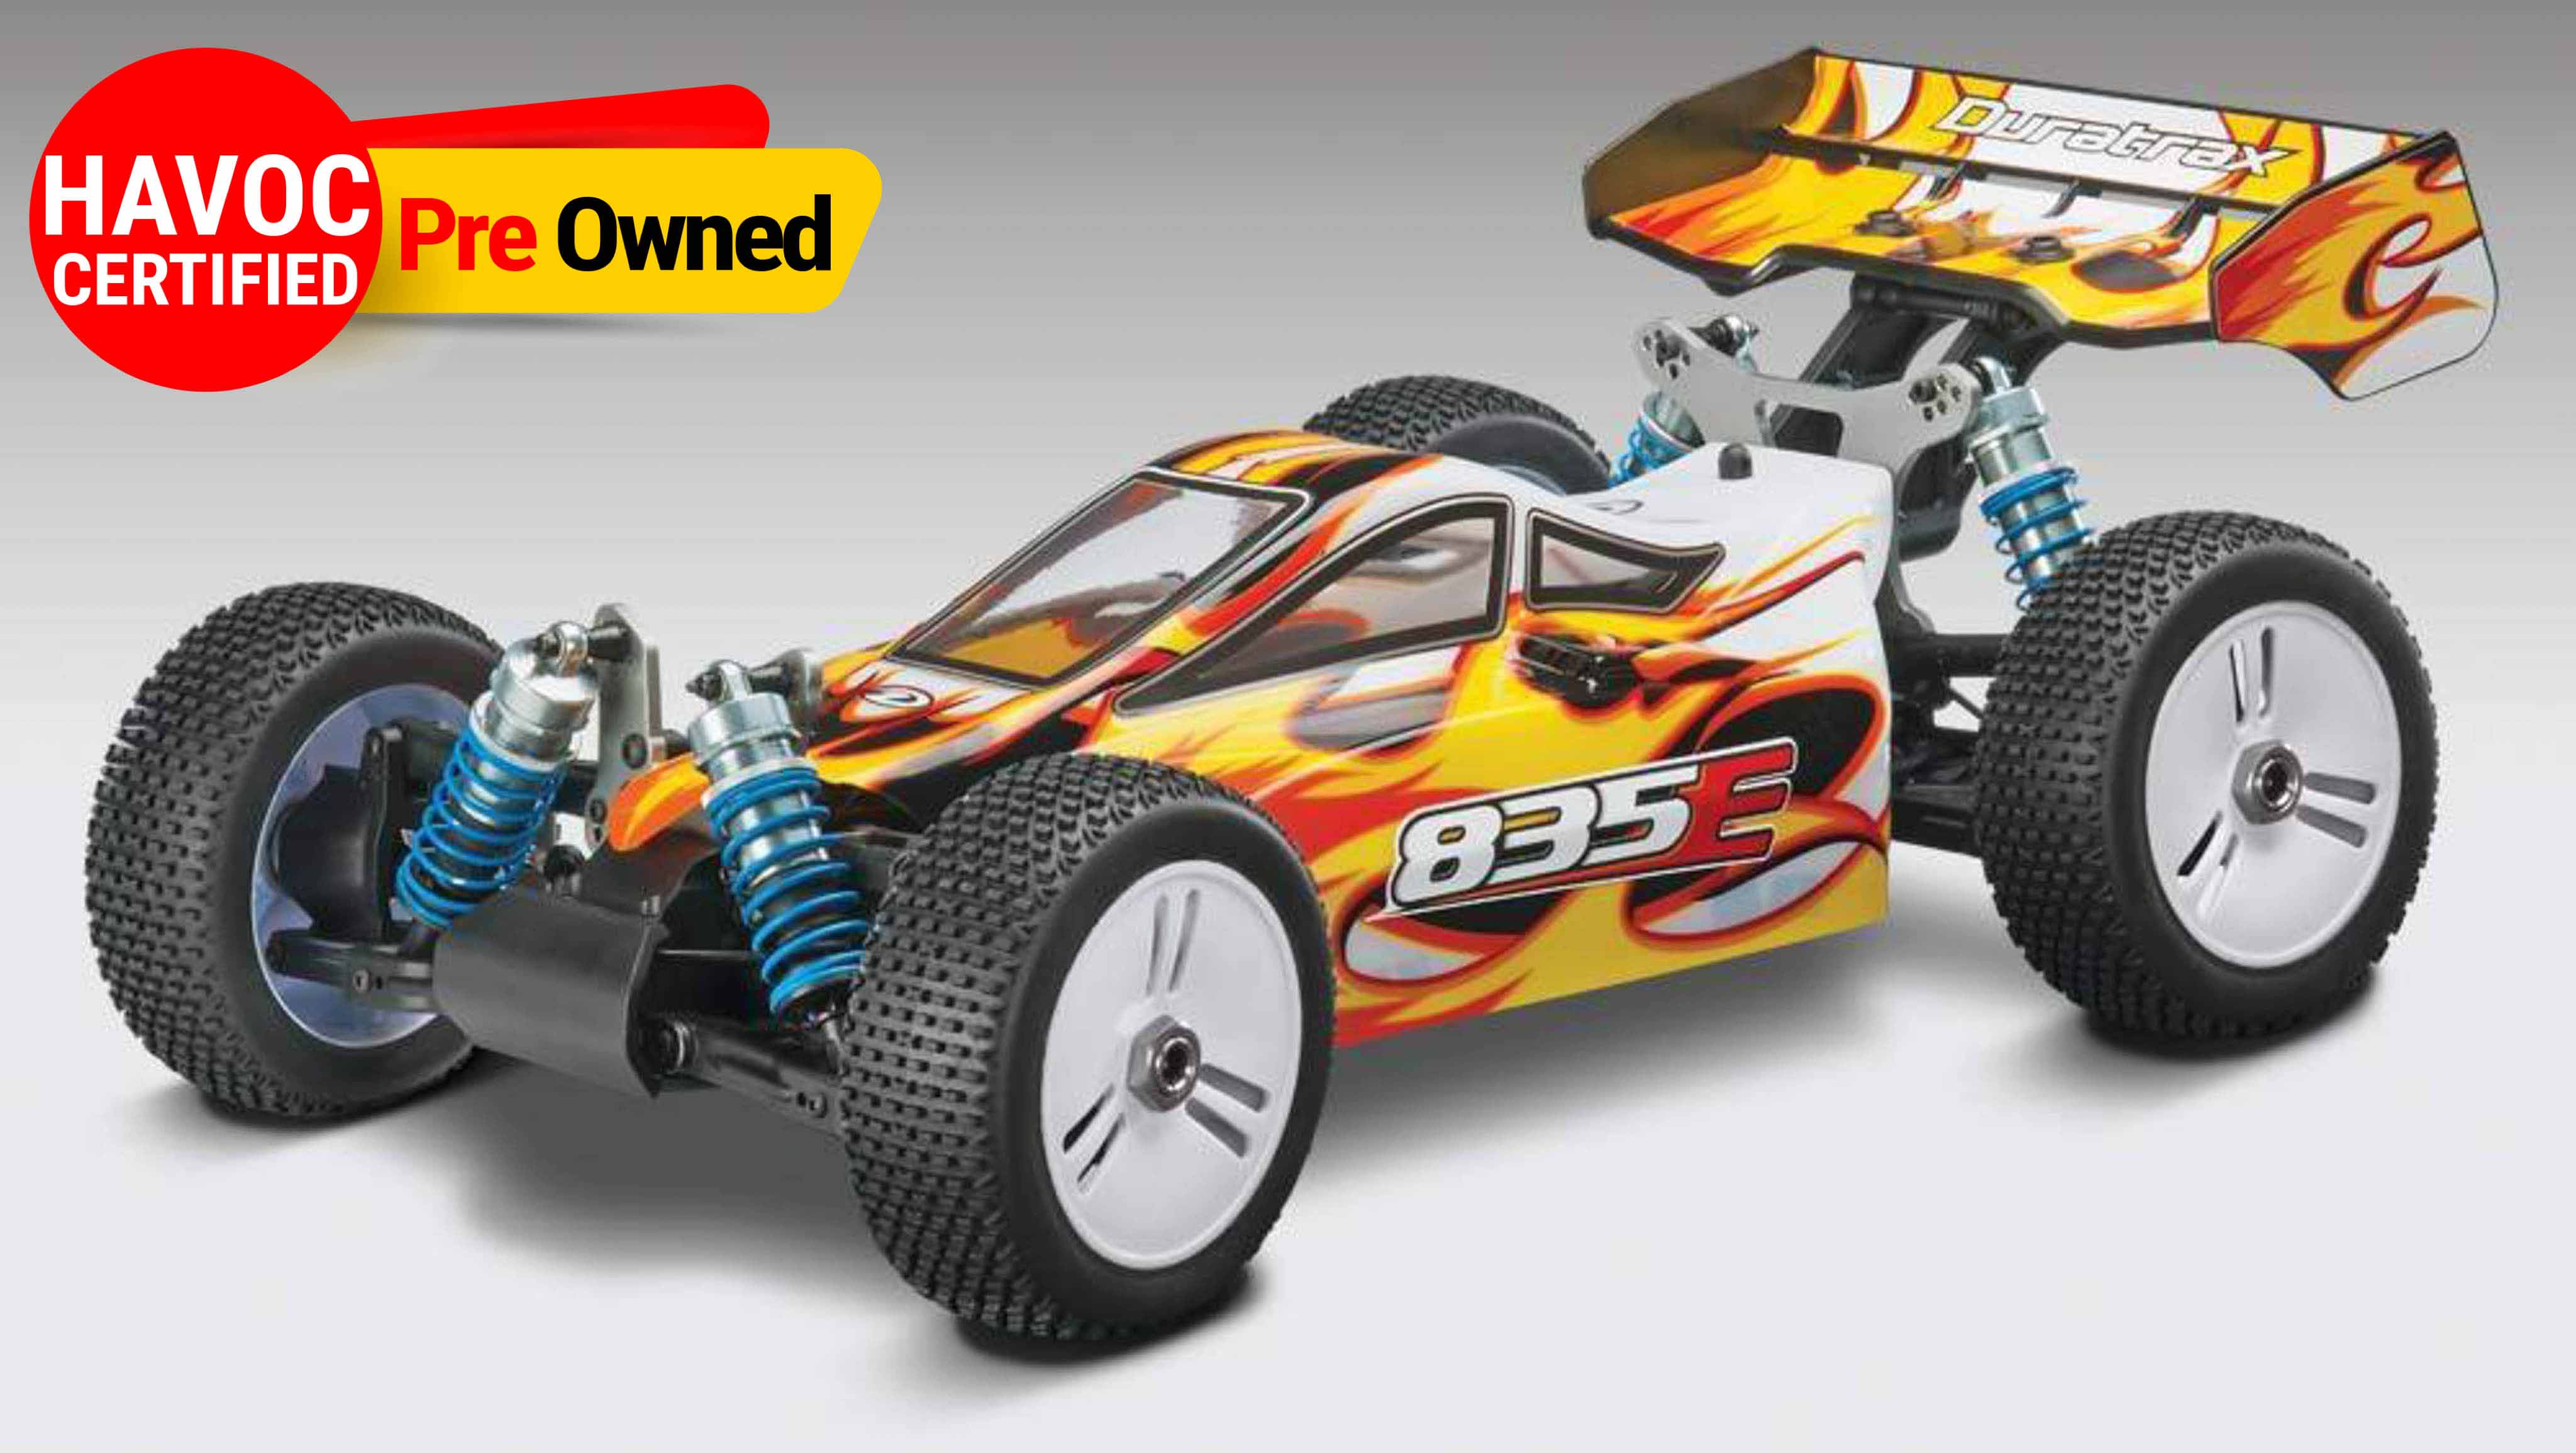 Duratrax 835E 1:8Scale 4Wd Buggy (Quality Preowned)